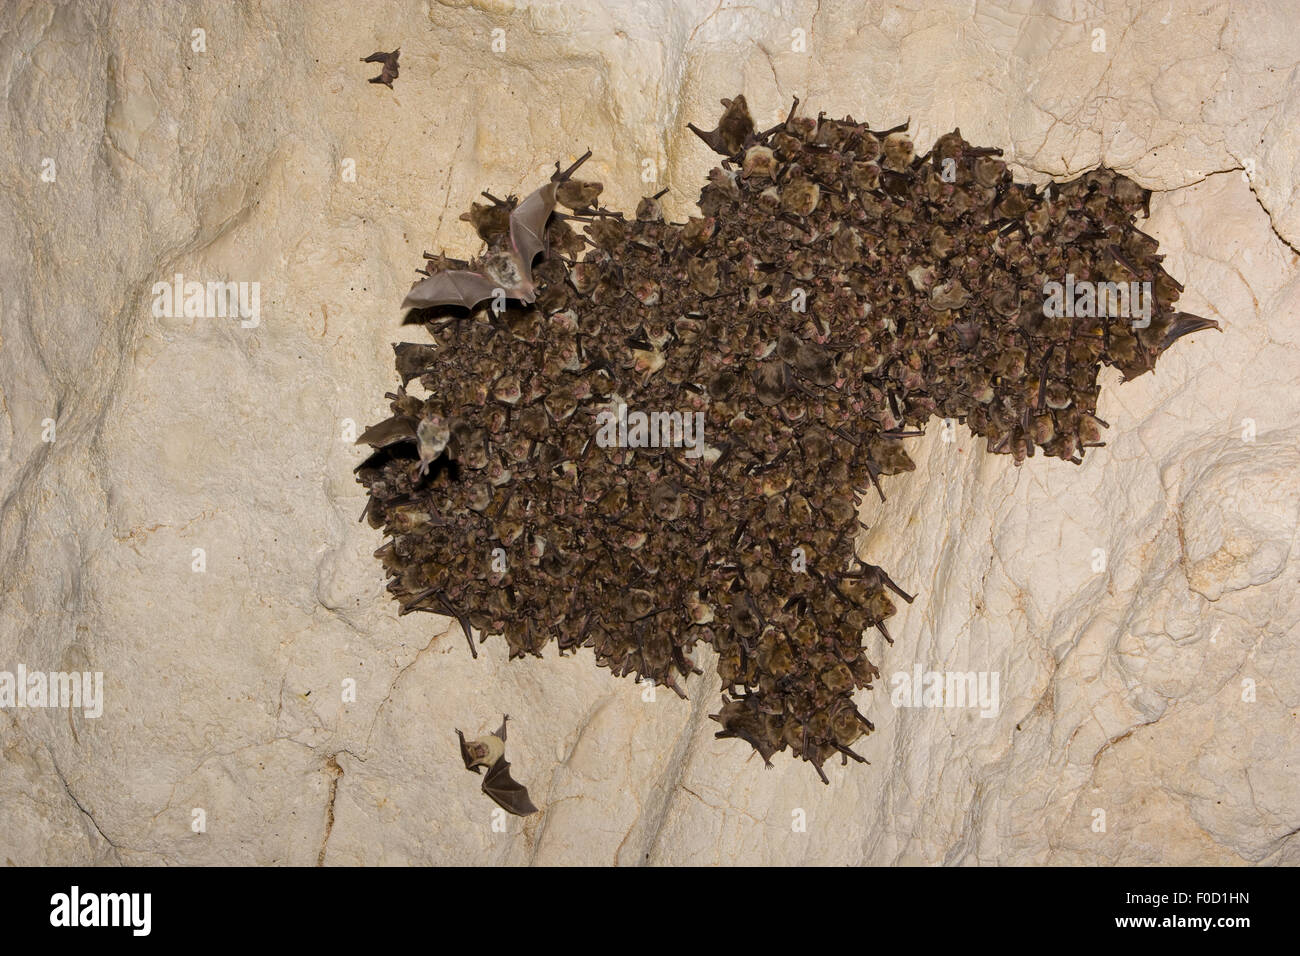 Mouse-eared bats (Myotis sp) and Schreiber's long fingered bats (Miniopterus schreibersi) roosting in cave, Bulgaria, May 2008 Stock Photo